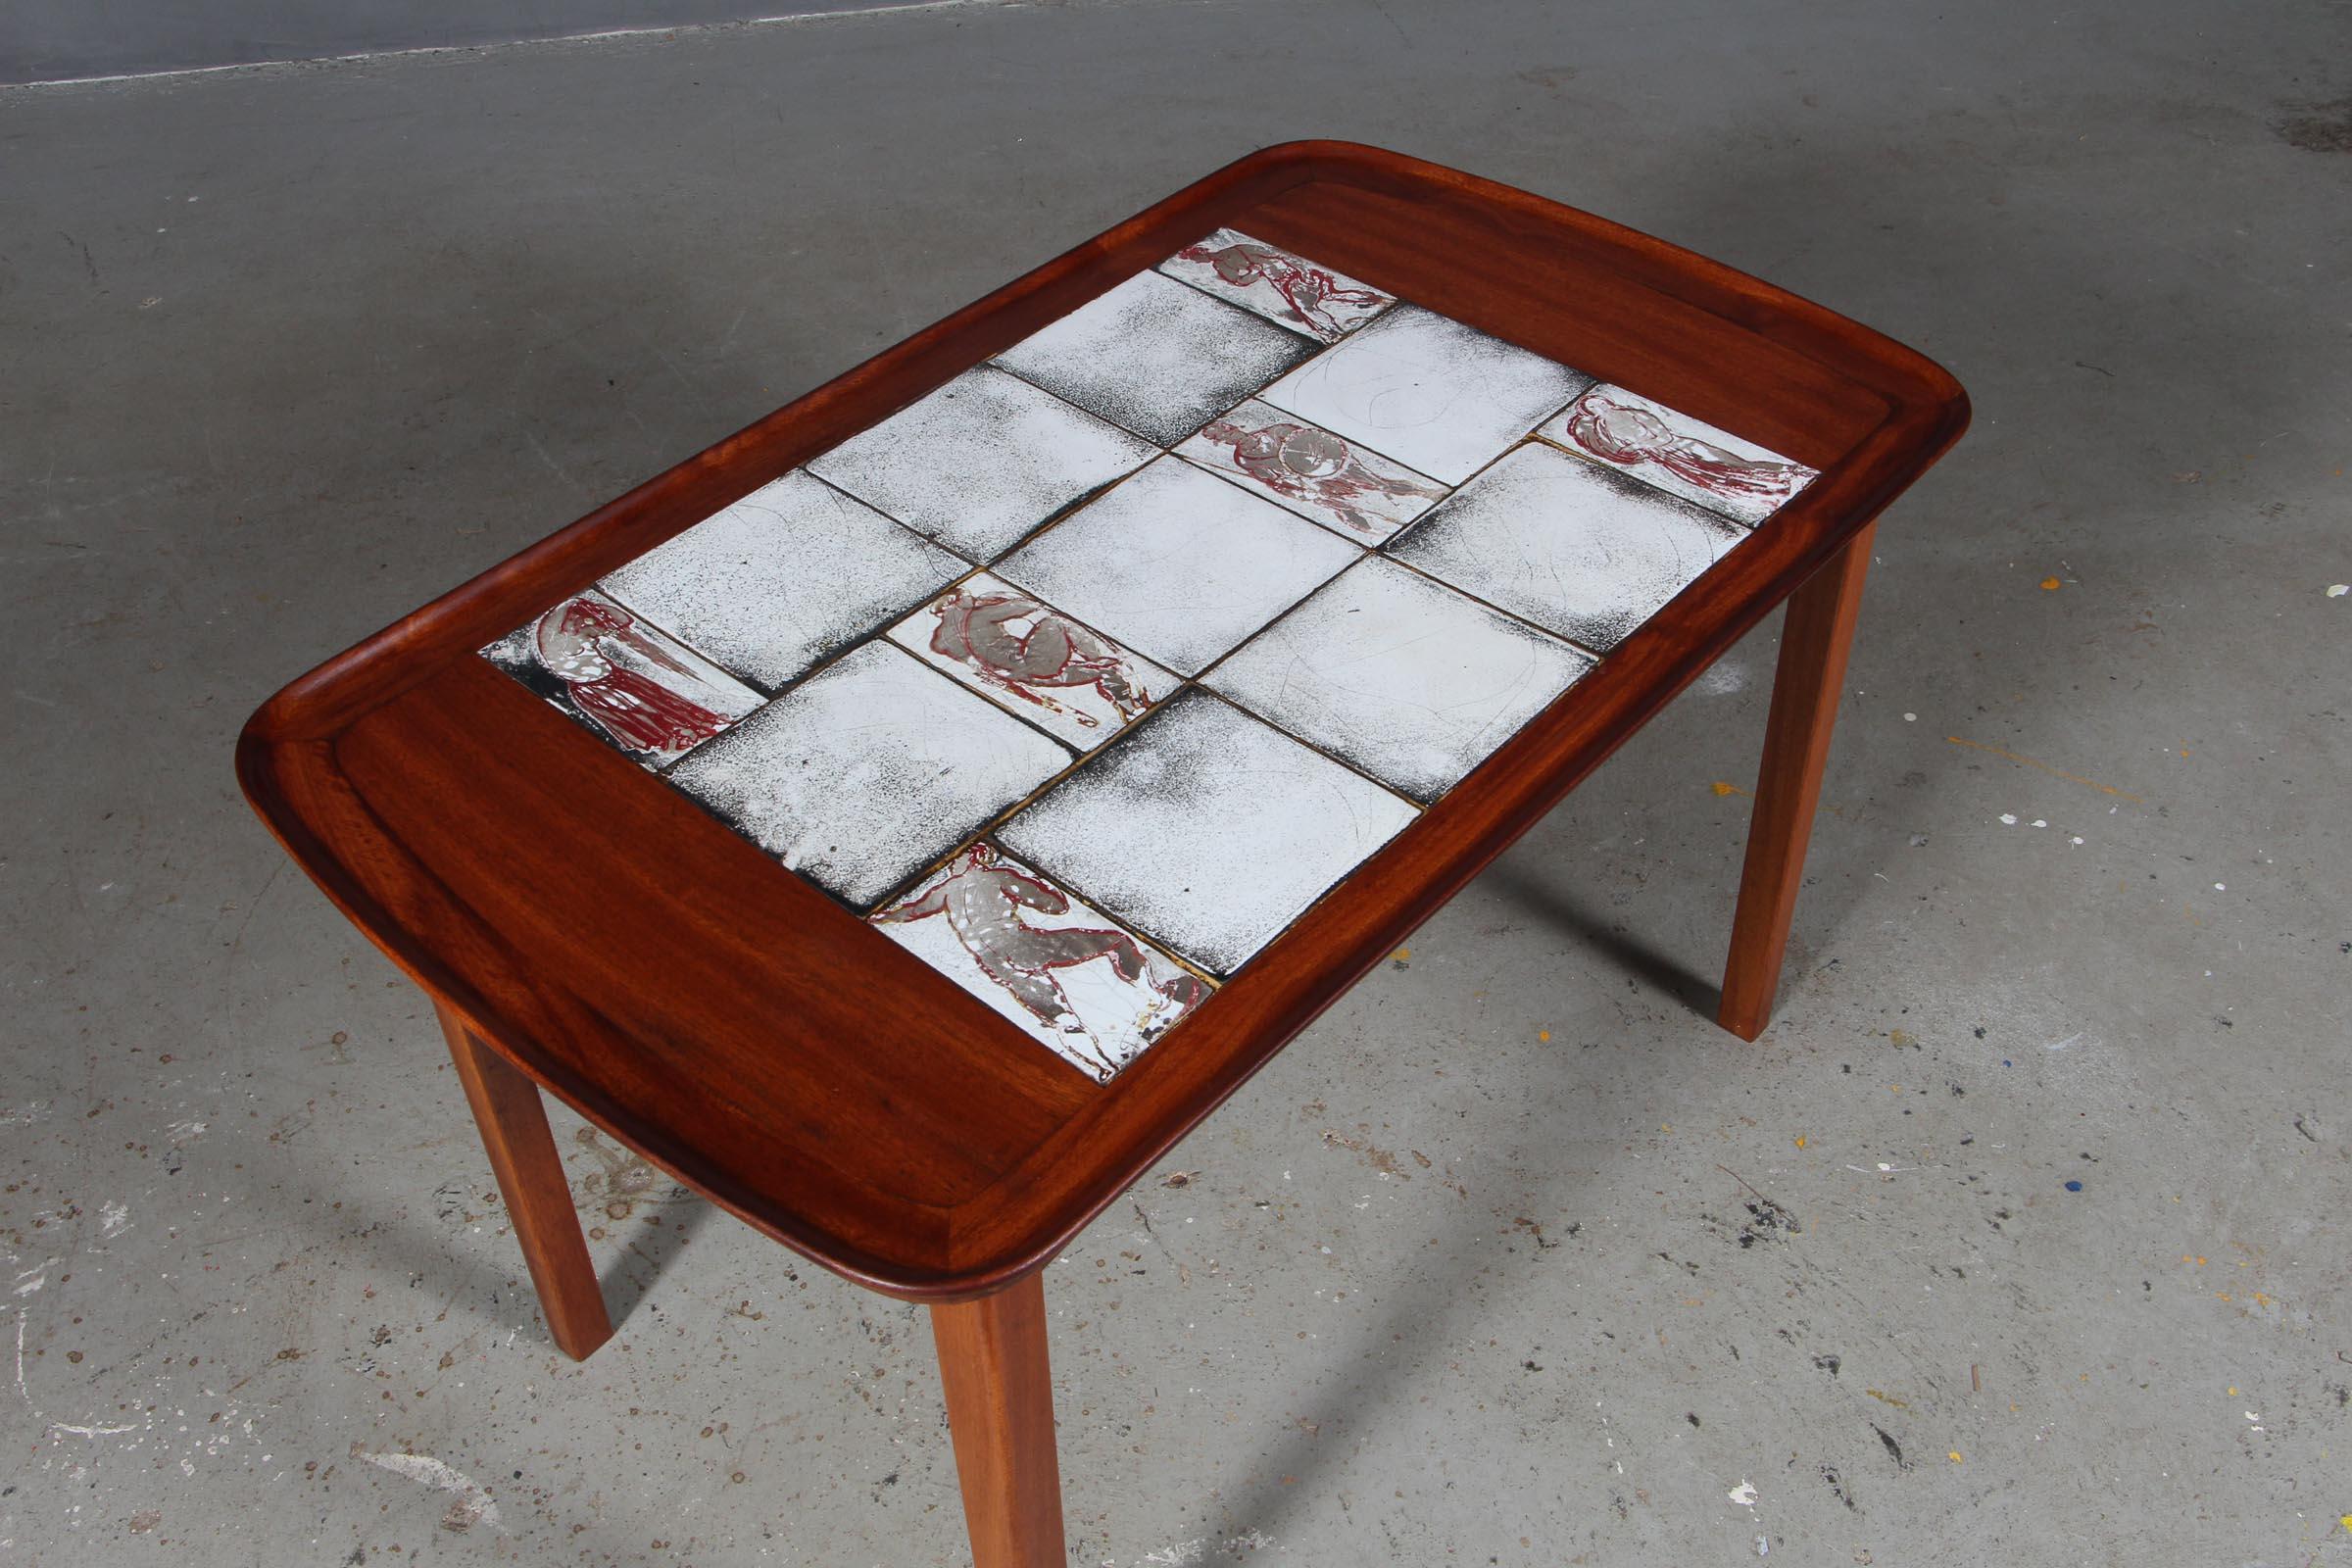 Jacob Kjær coffee table.

Made of solid cuban mahogany. Tiles By Jens Thirslund from Kähler.

Made by Jacob Kjær.